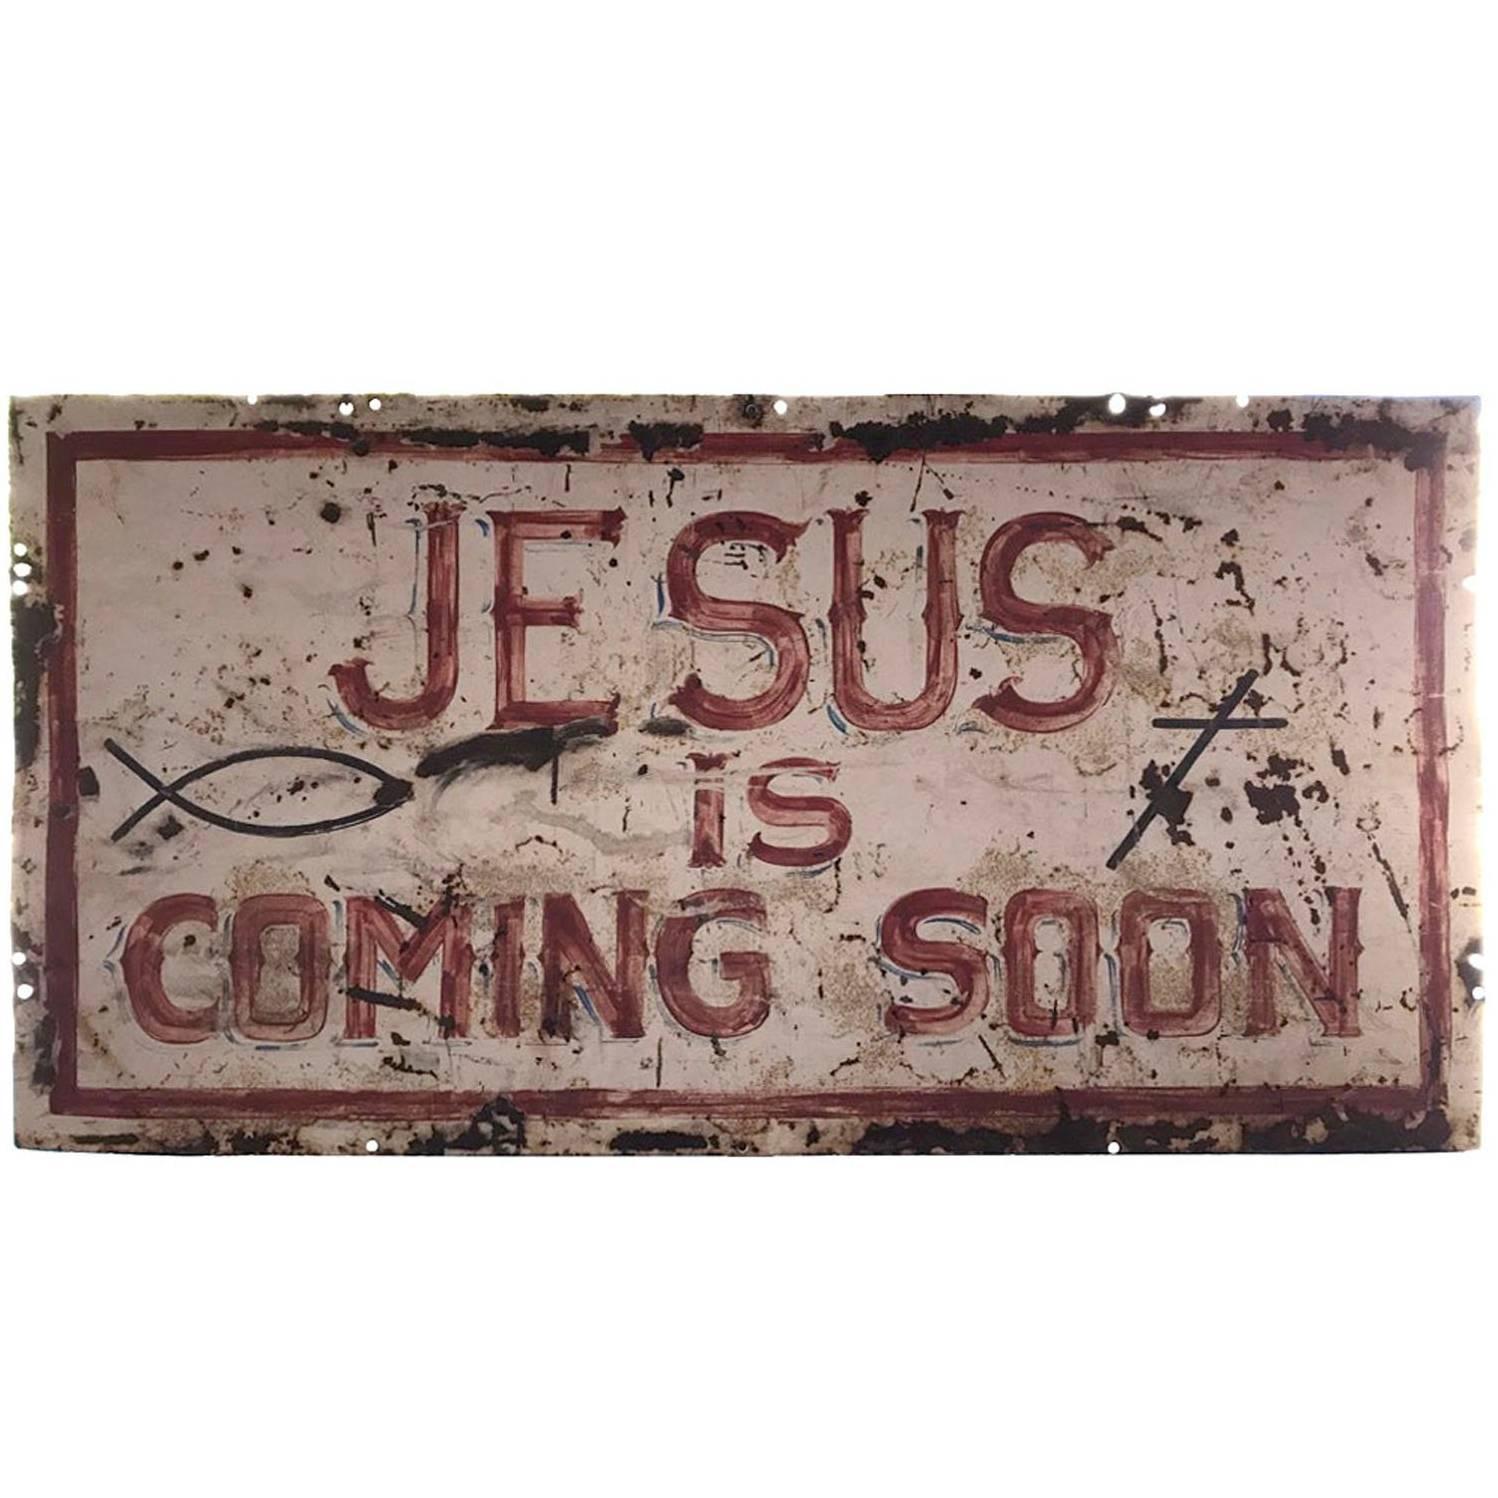 "Second Coming" Hand-Painted Metal Sign For Sale